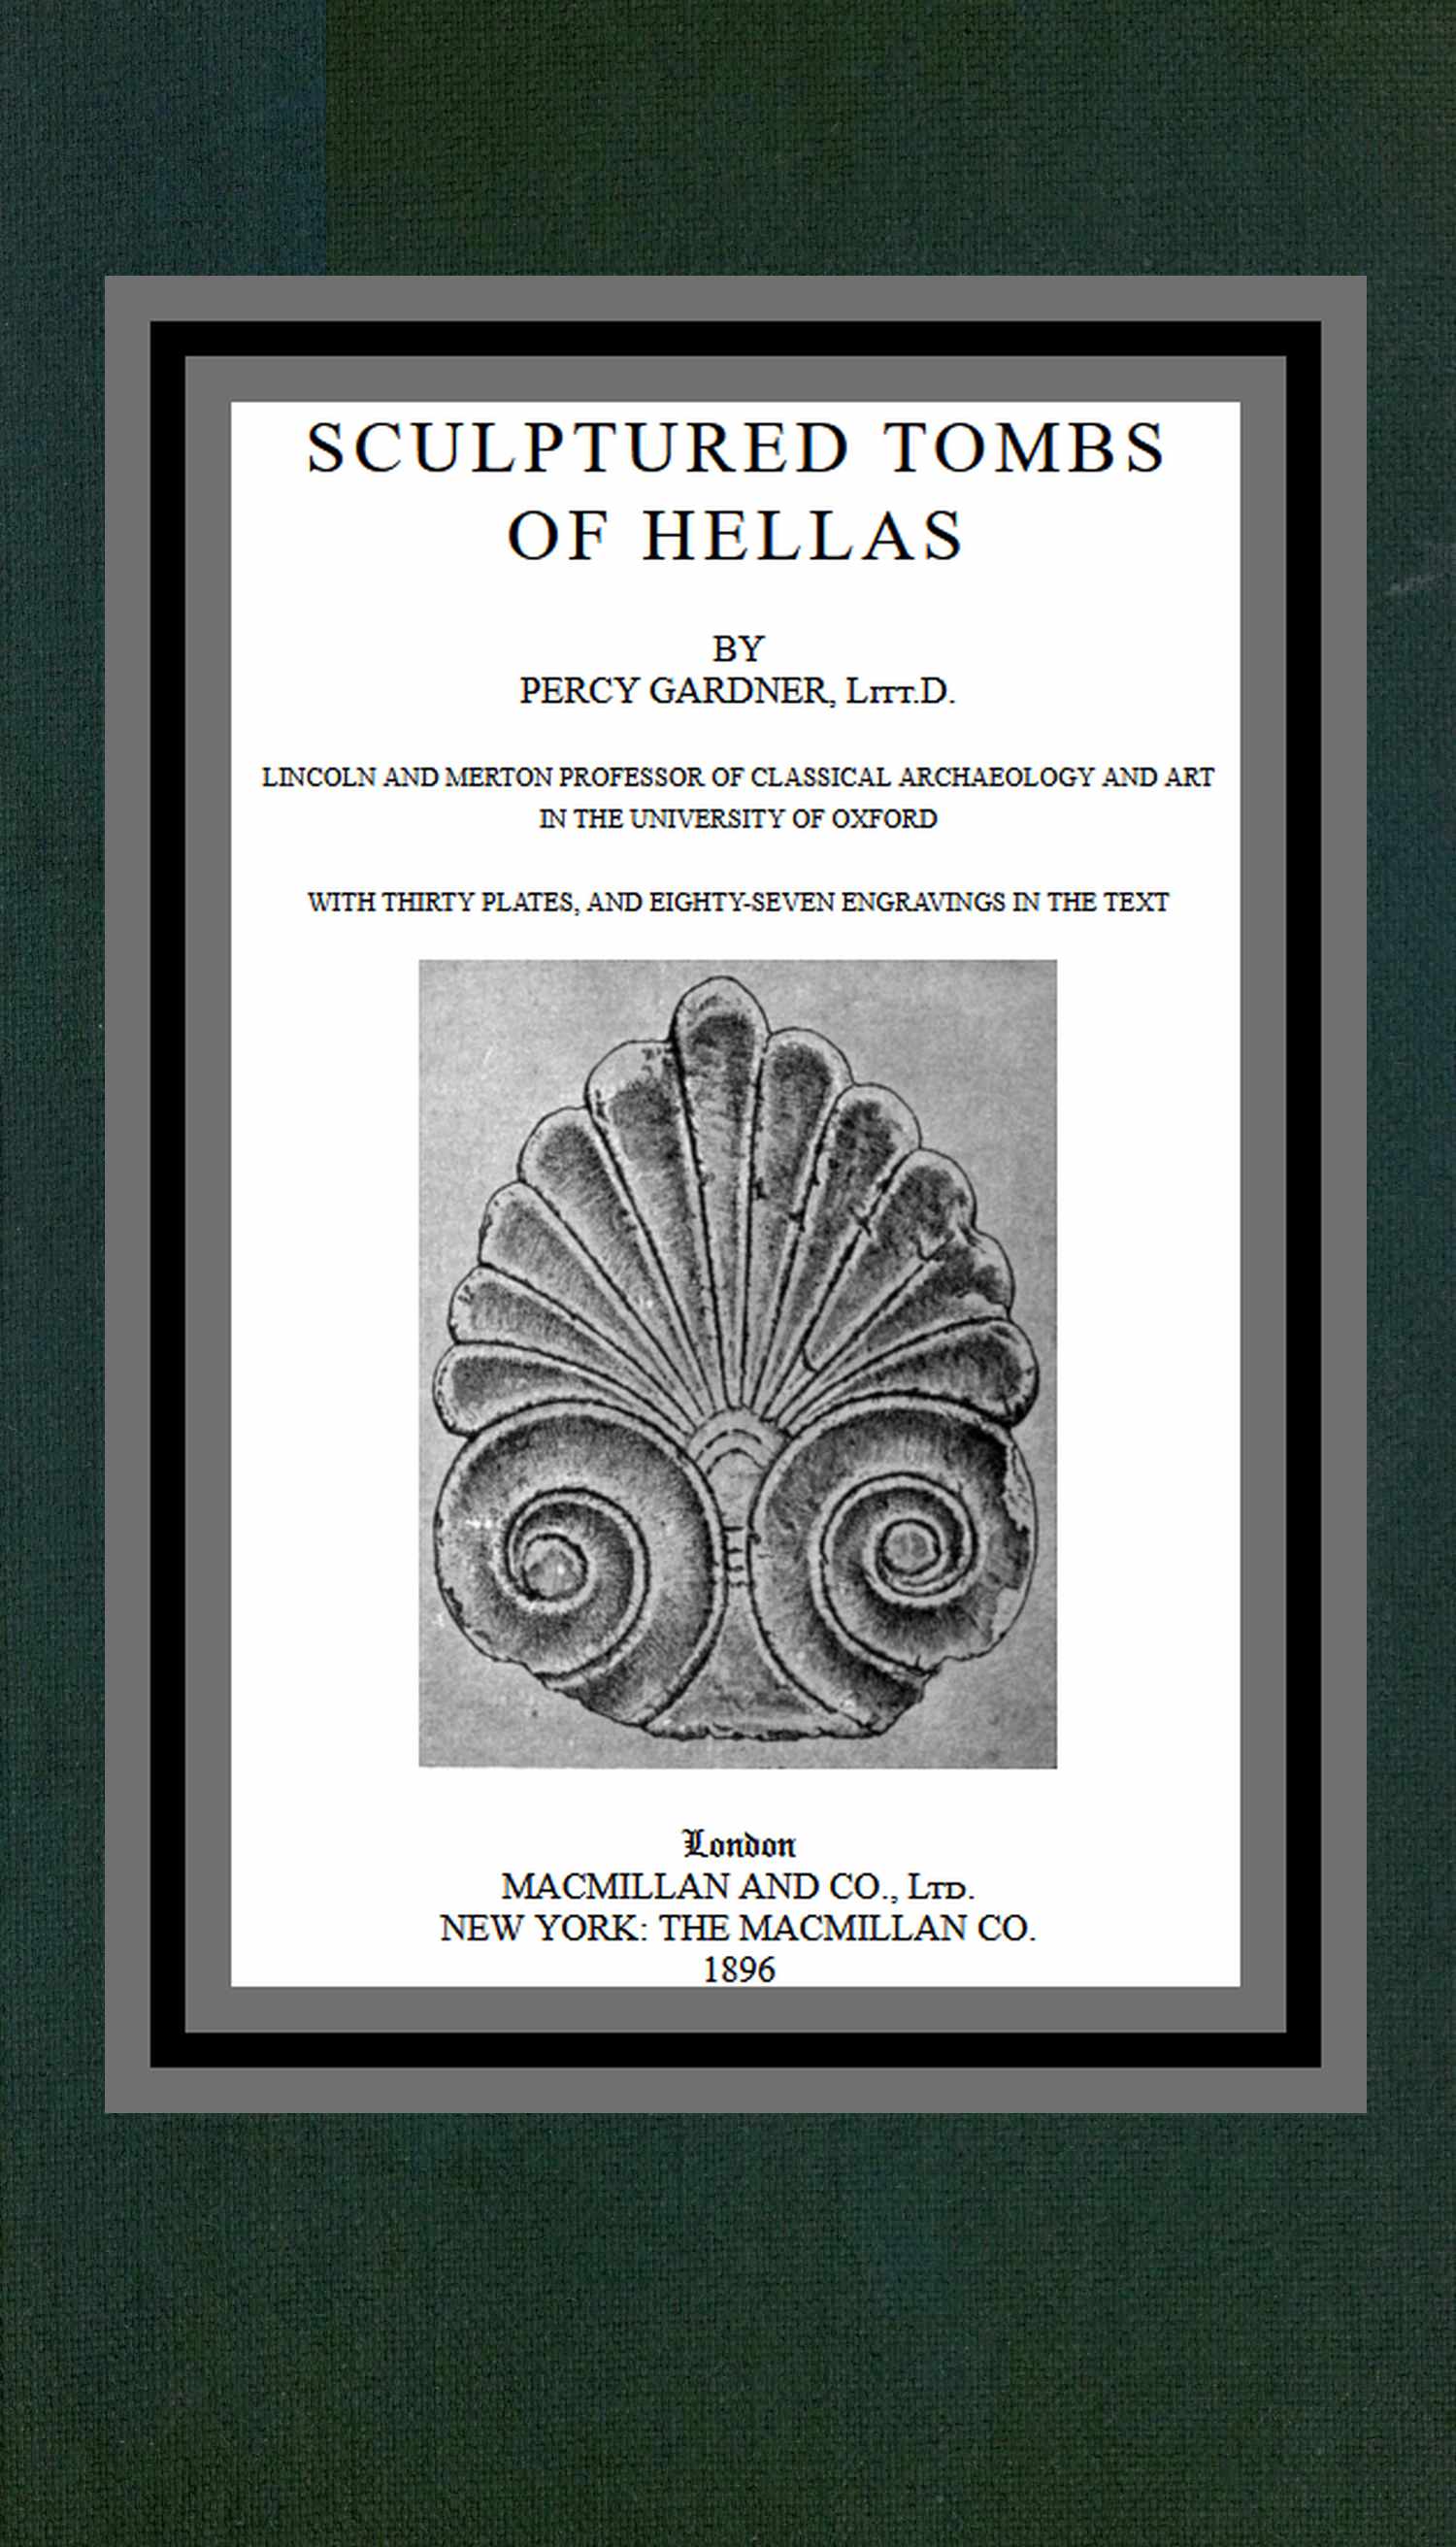 The Project Gutenberg eBook of Sculptured tombs of Hellas, by Percy Gardner. image